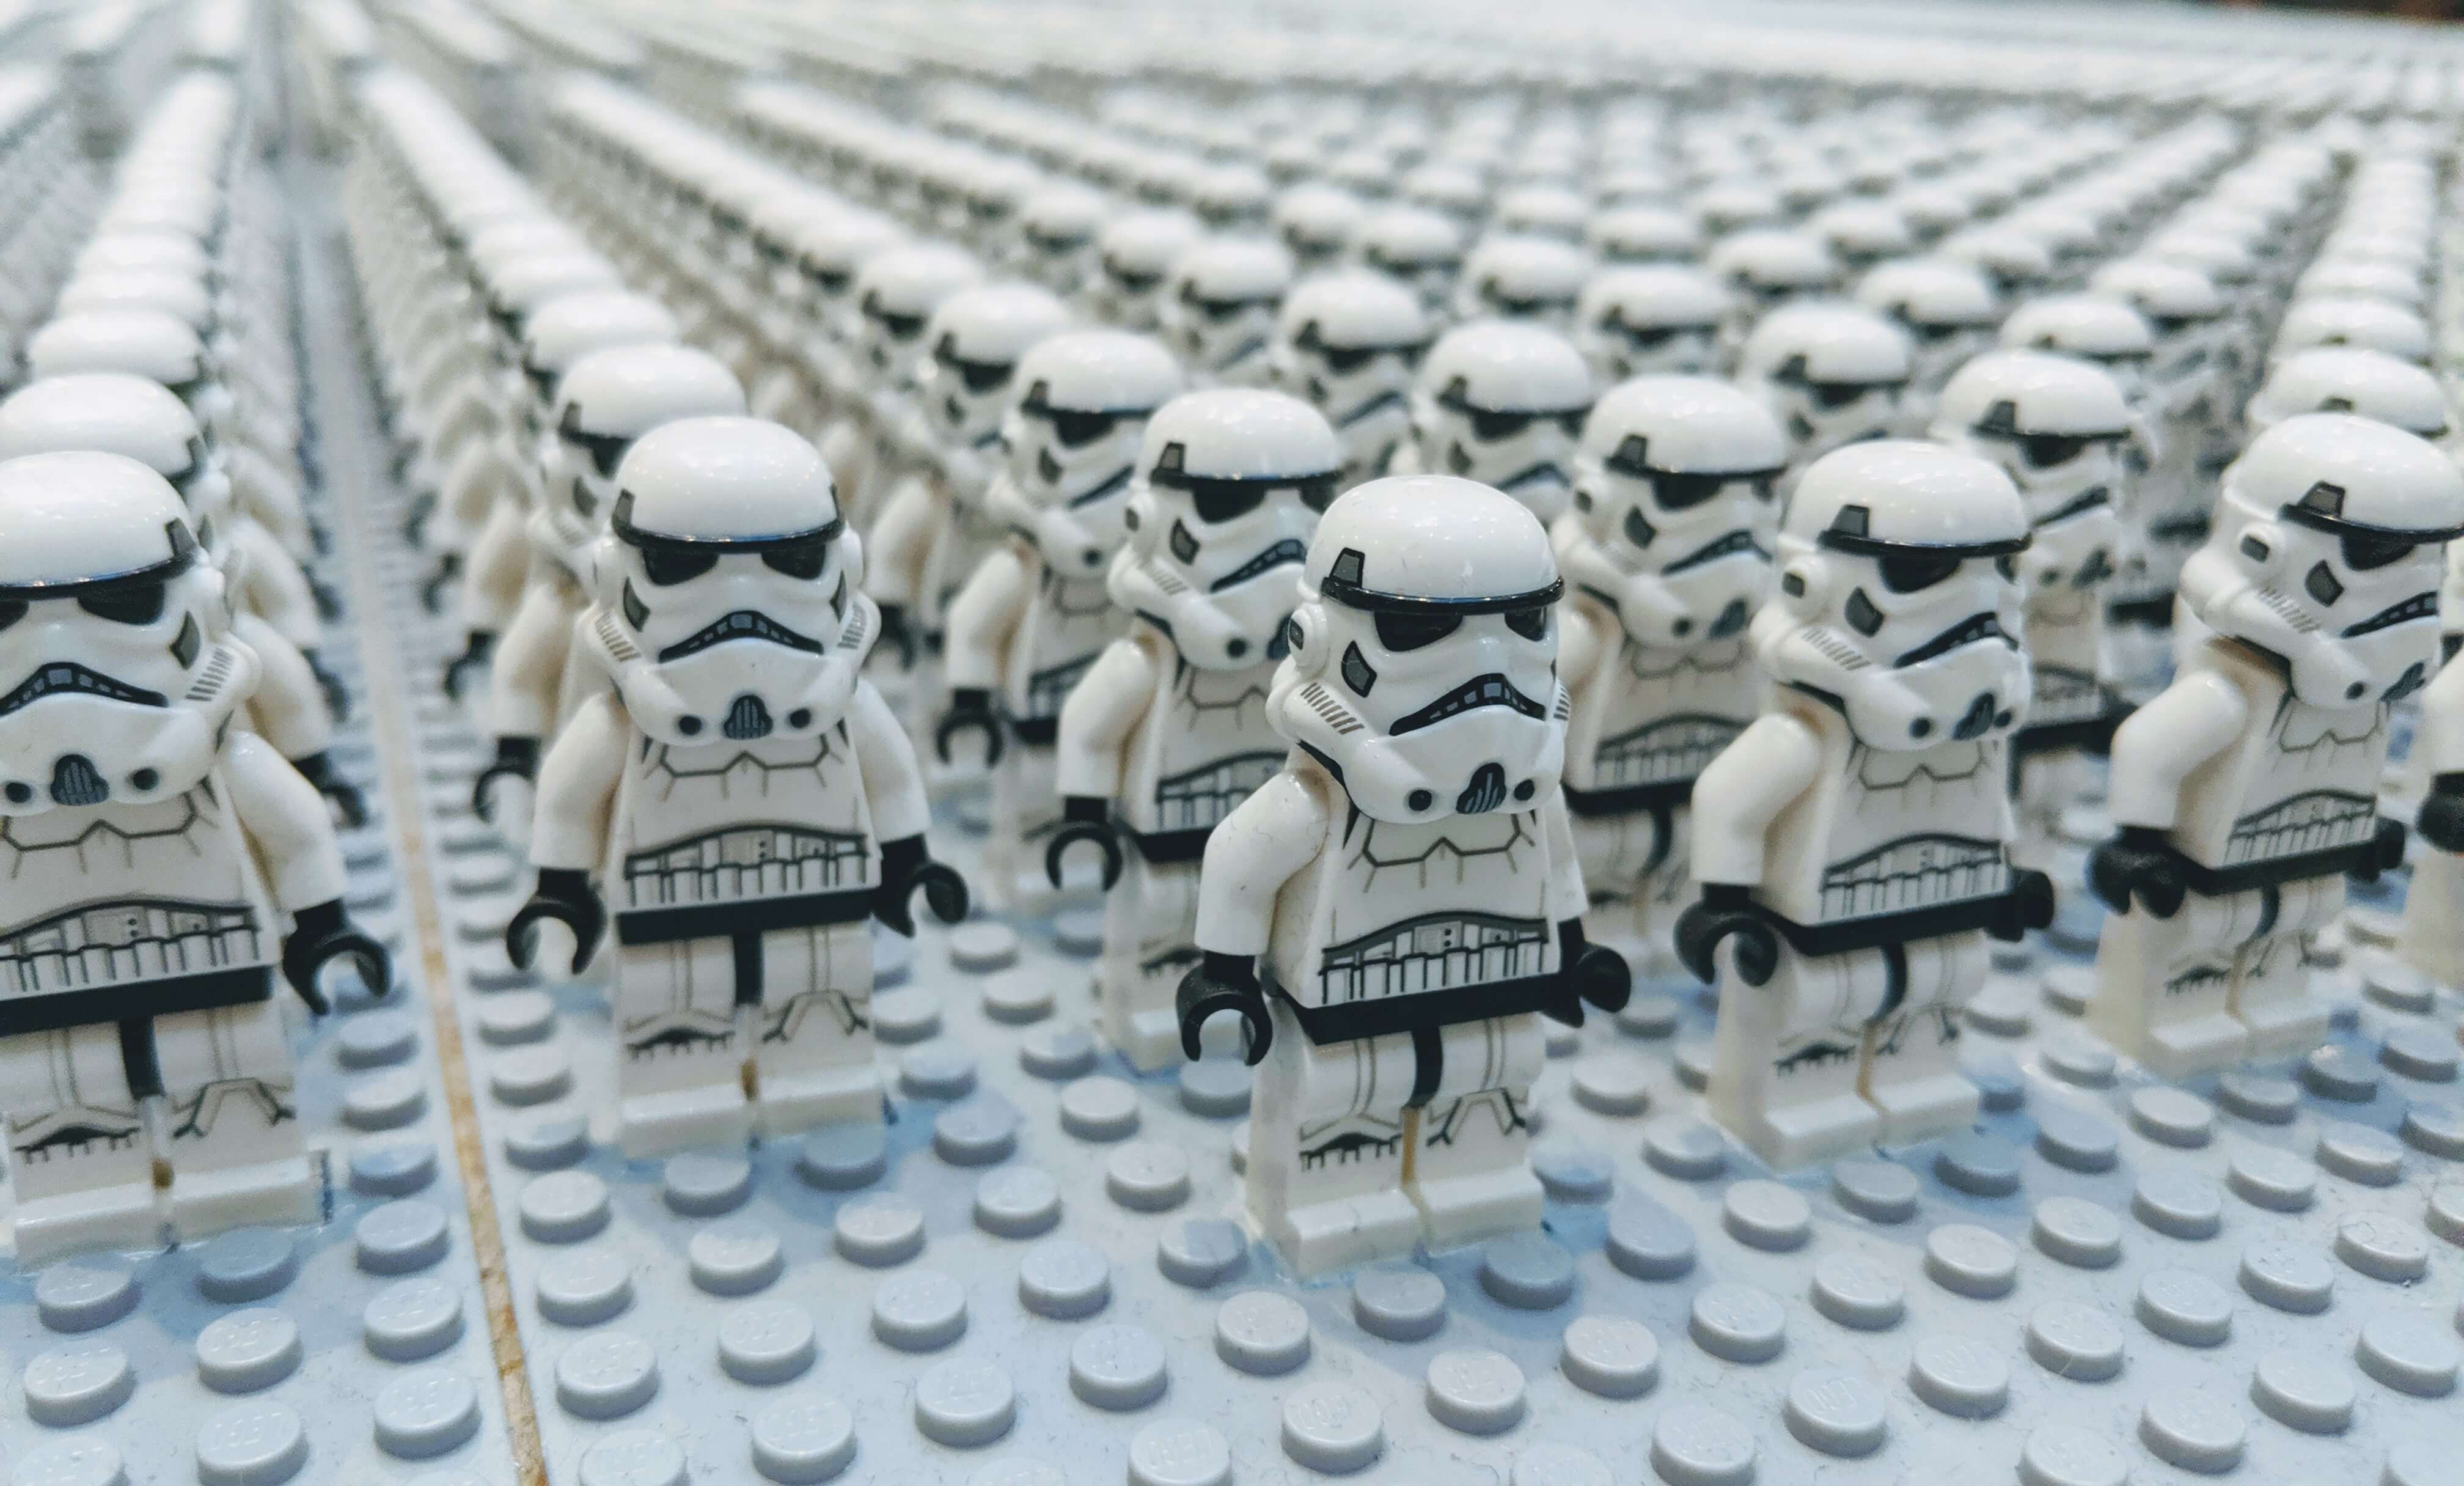 Image of Star Wars clones. Organizations need uniformity in order to be transparent, just like how the Star Wars clones are all uniform.